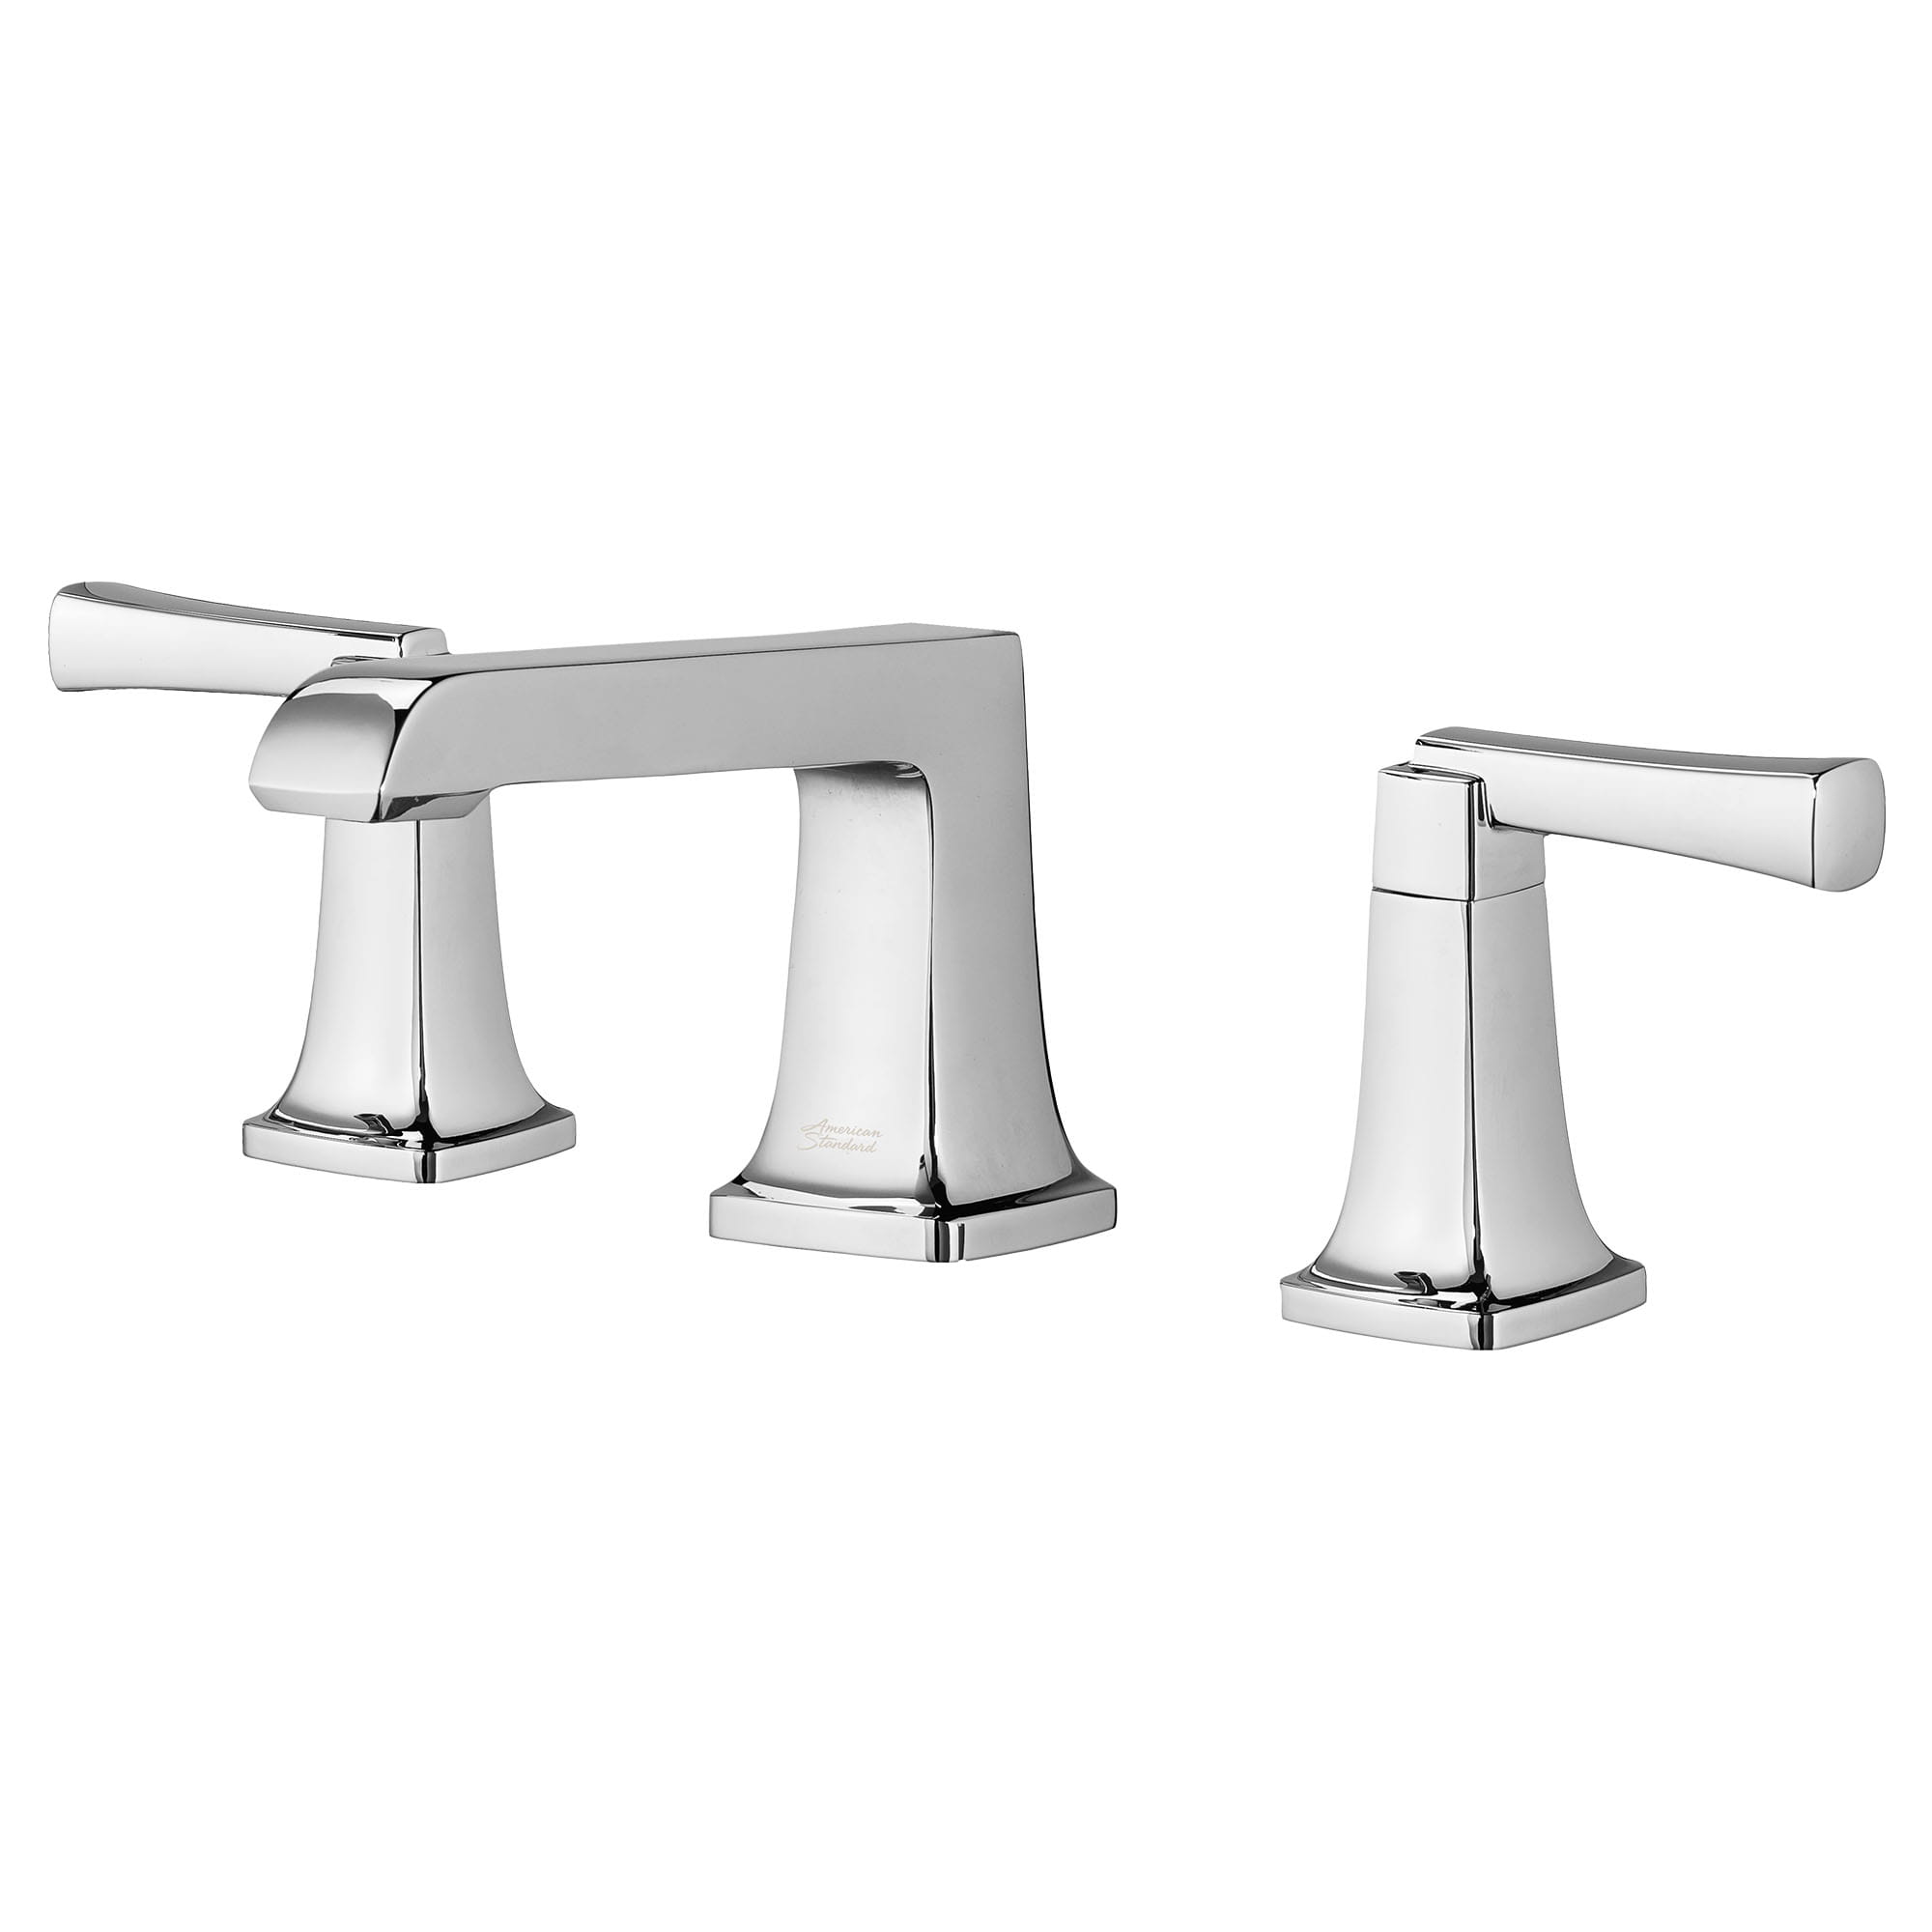 Townsend 8 Inch Widespread 2 Handle Bathroom Faucet 12 gpm 45 L min With Lever Handles CHROME